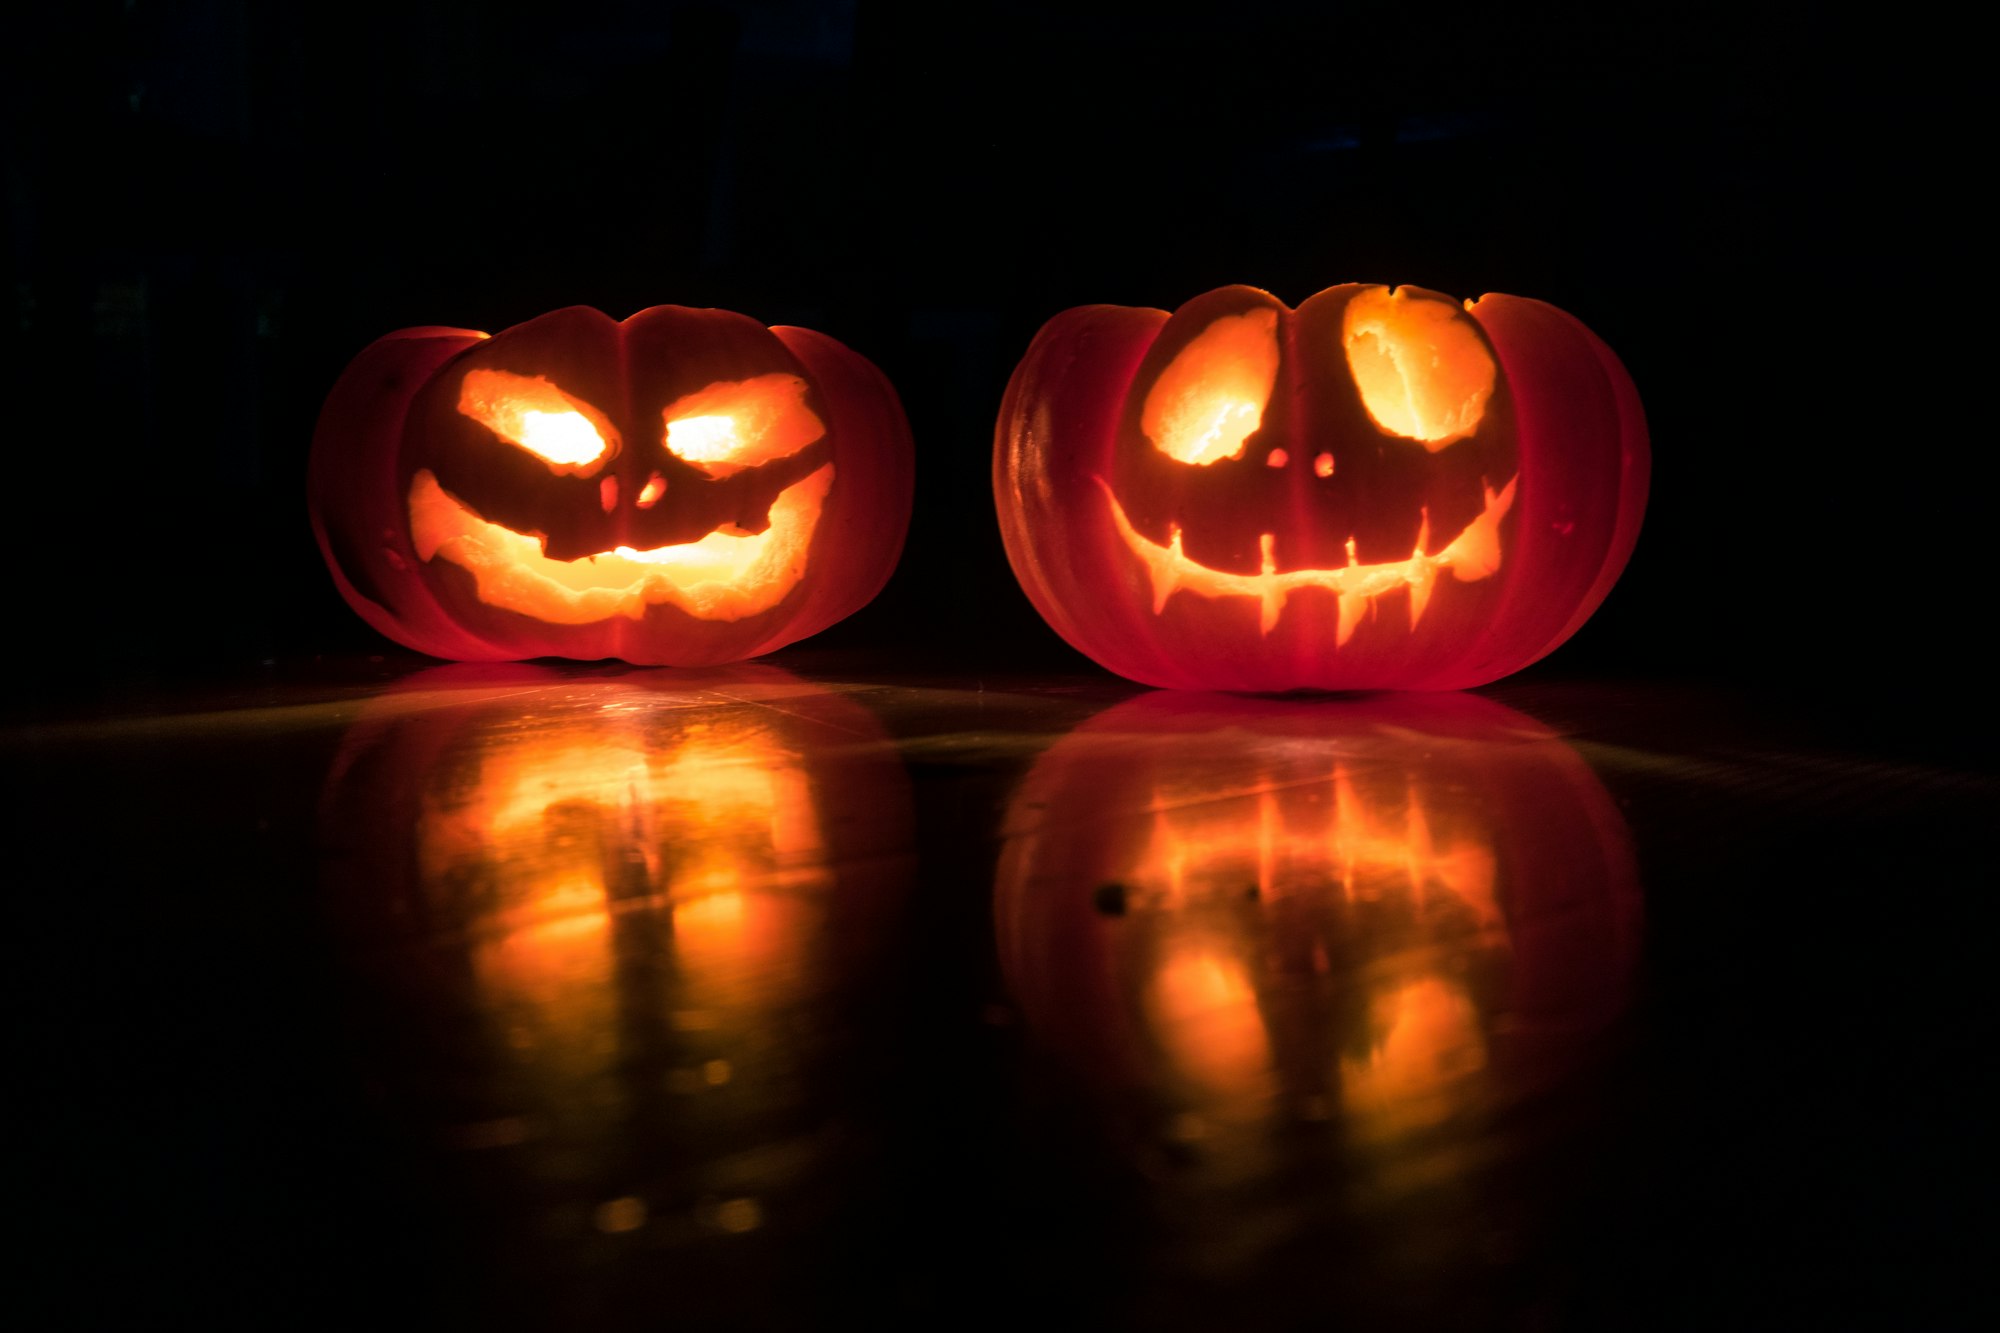 Up coming Halloween events to check out in Cape Town